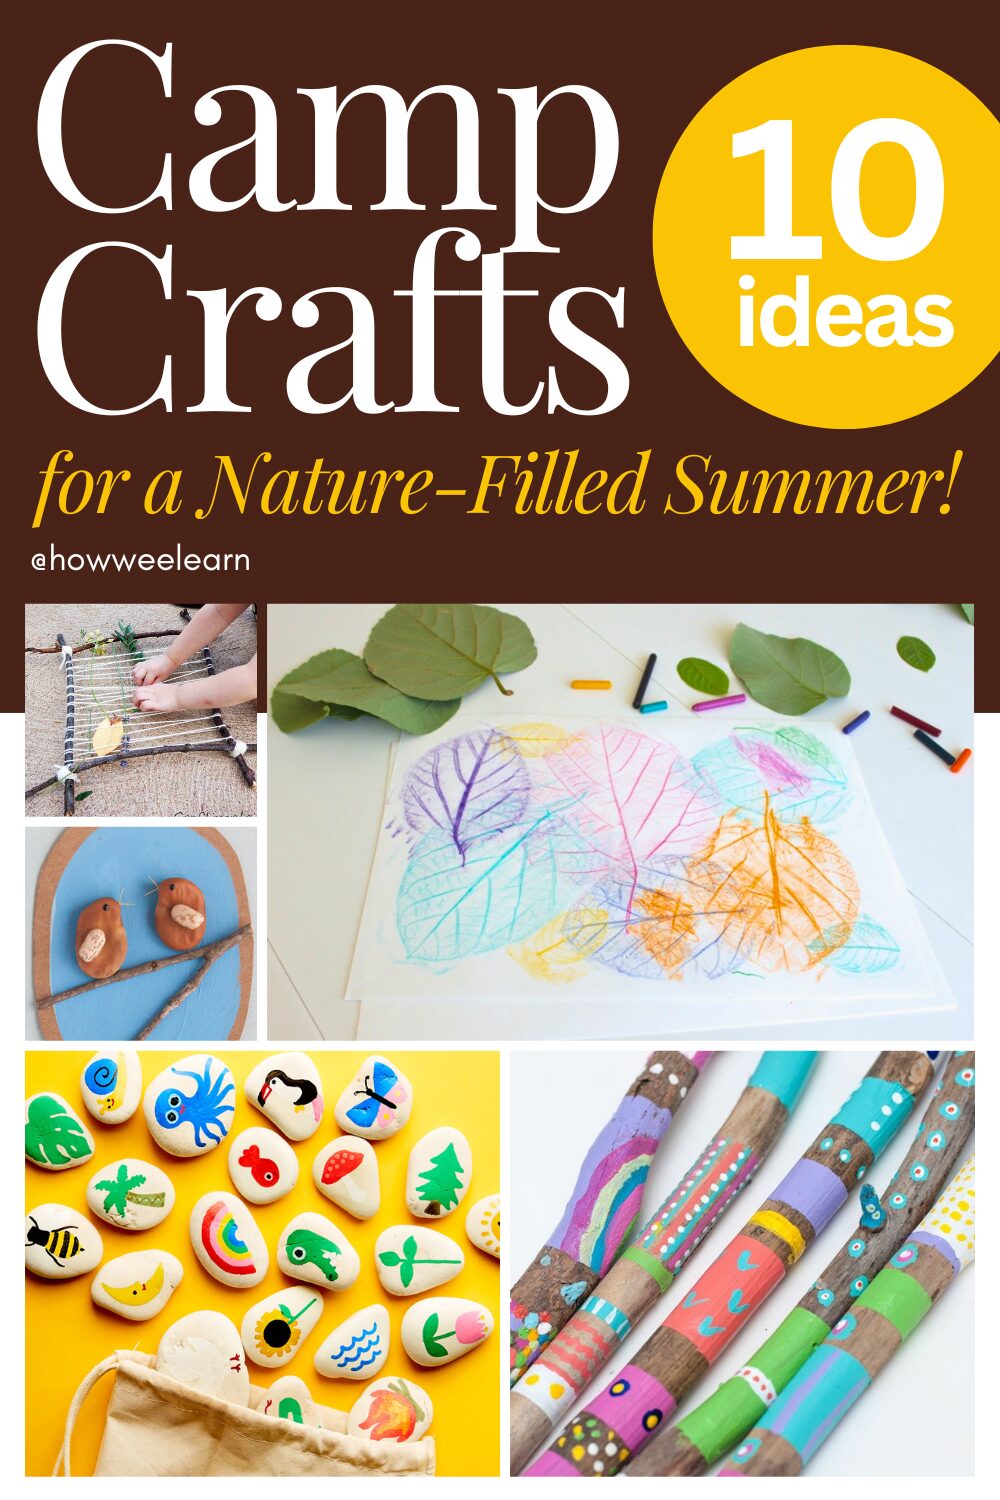 Camp Crafts for a Nature-Filled Summer, 10 Ideas